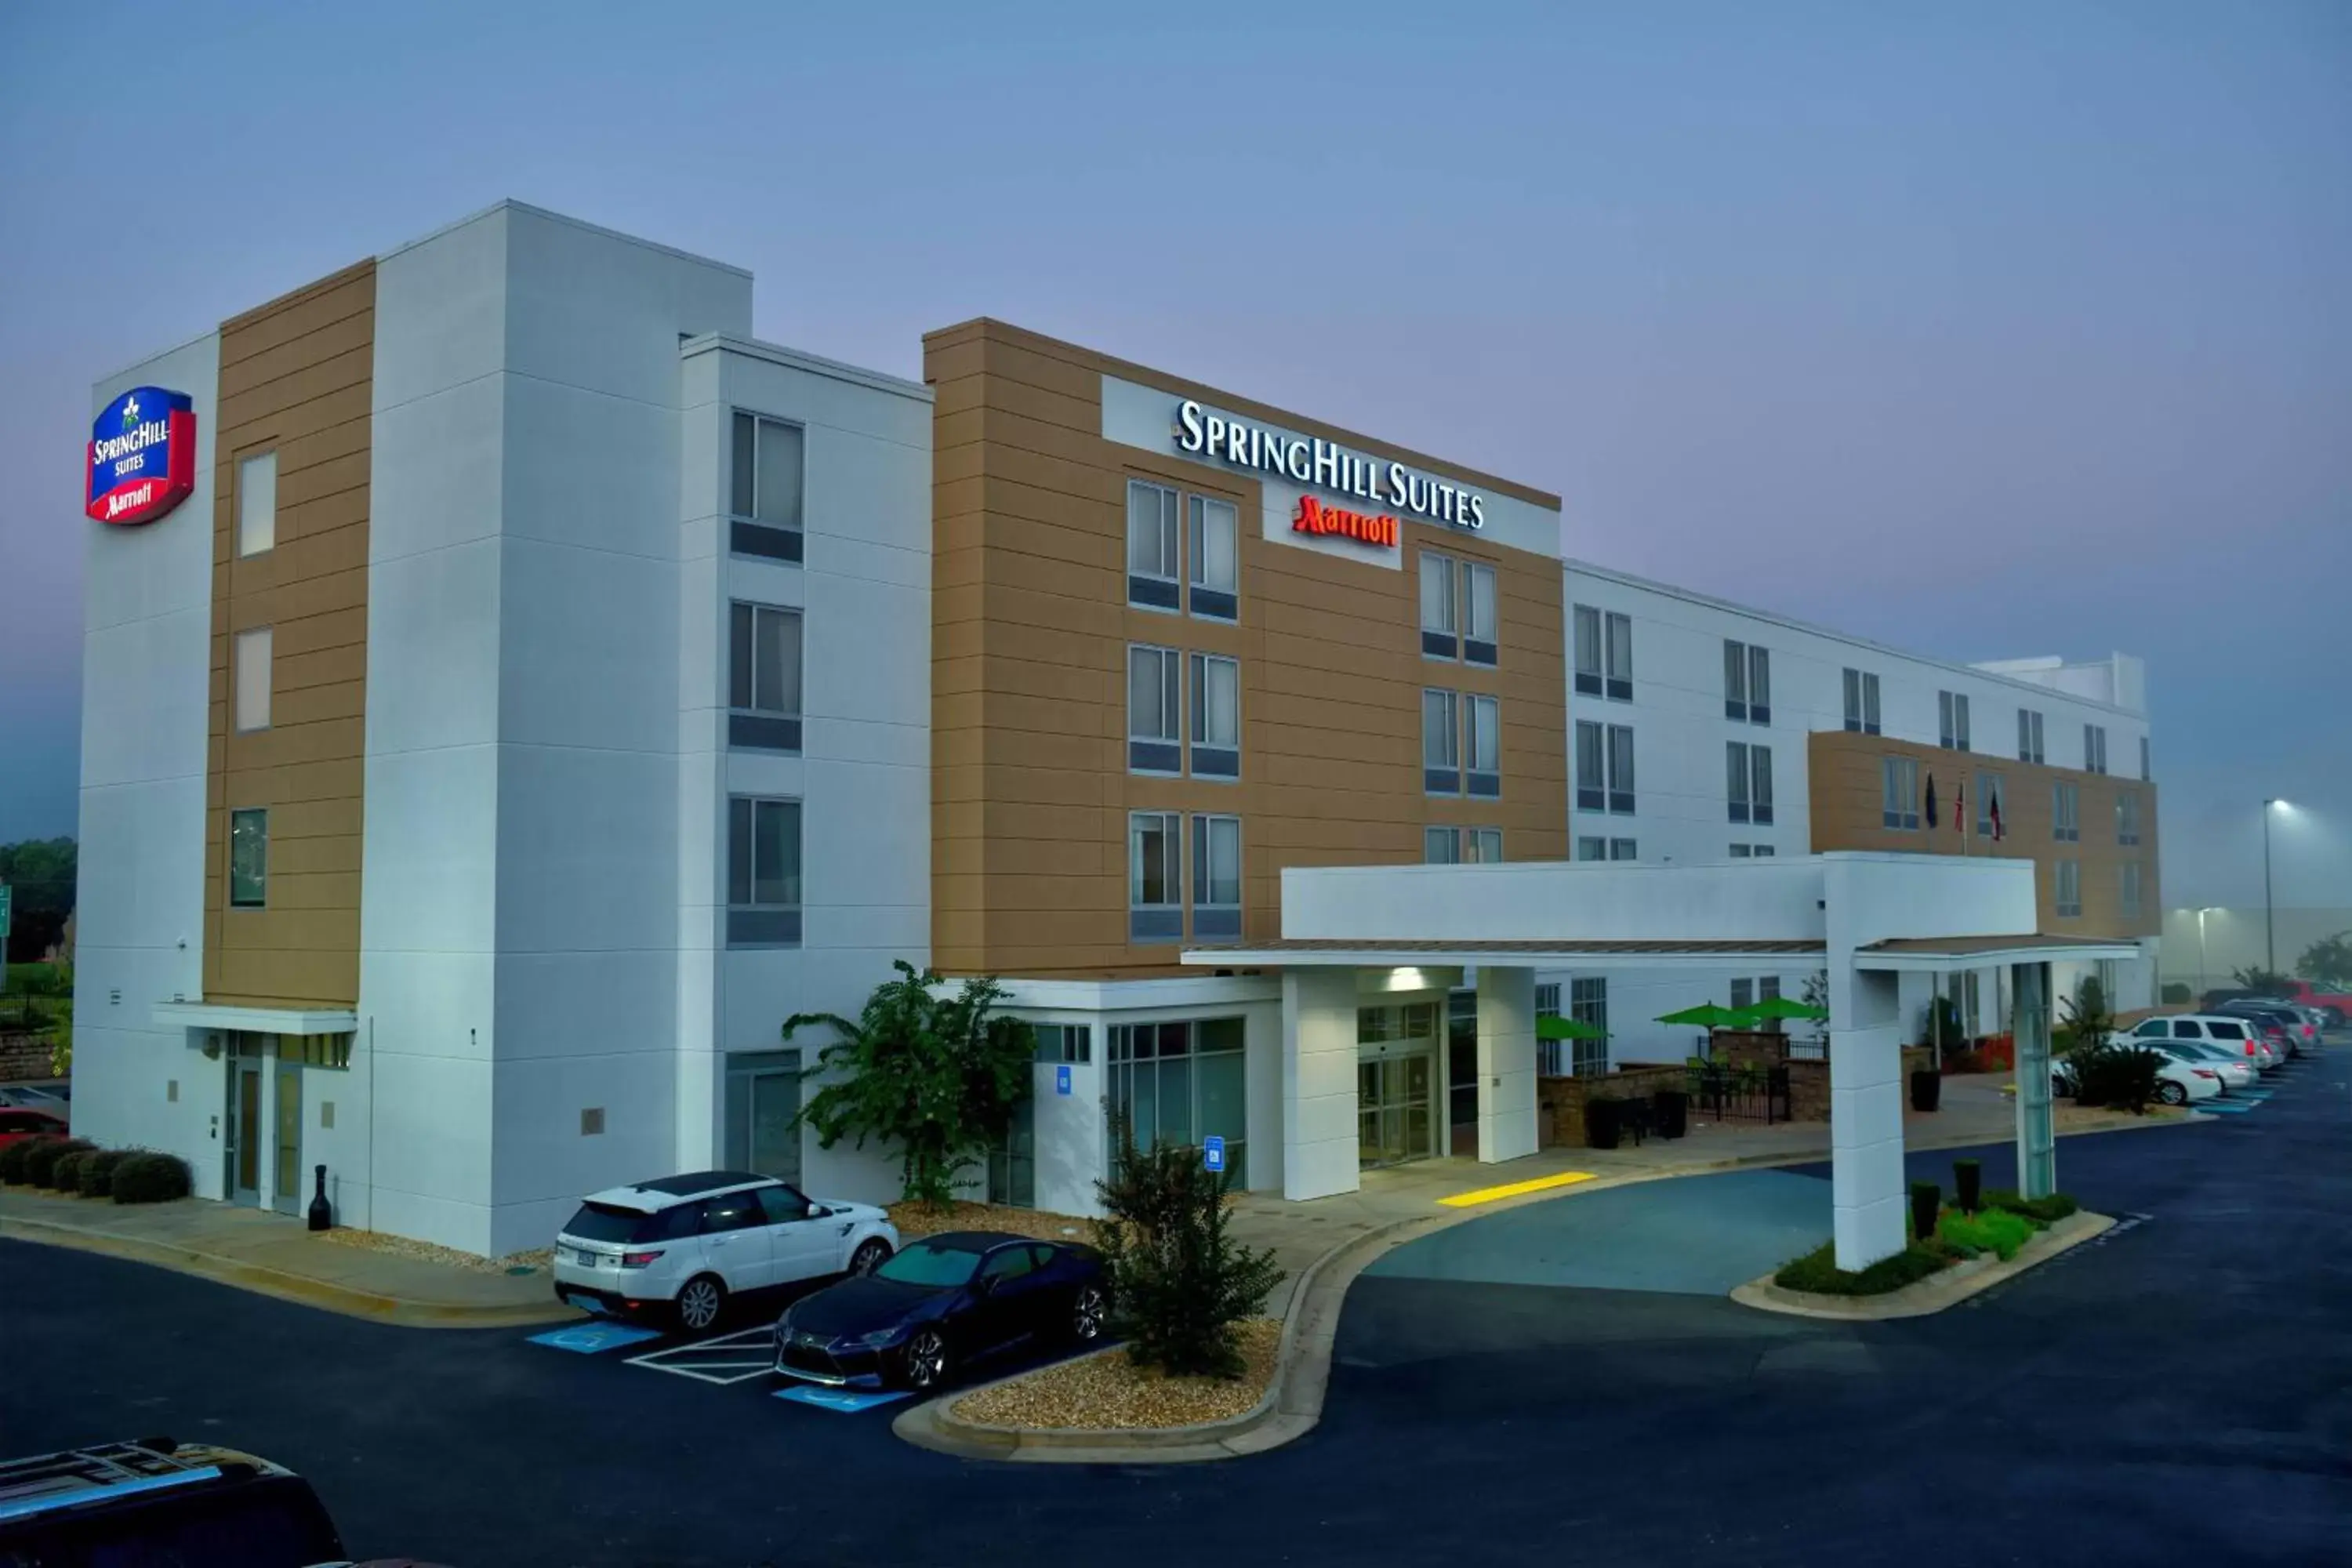 Property Building in SpringHill Suites by Marriott Macon